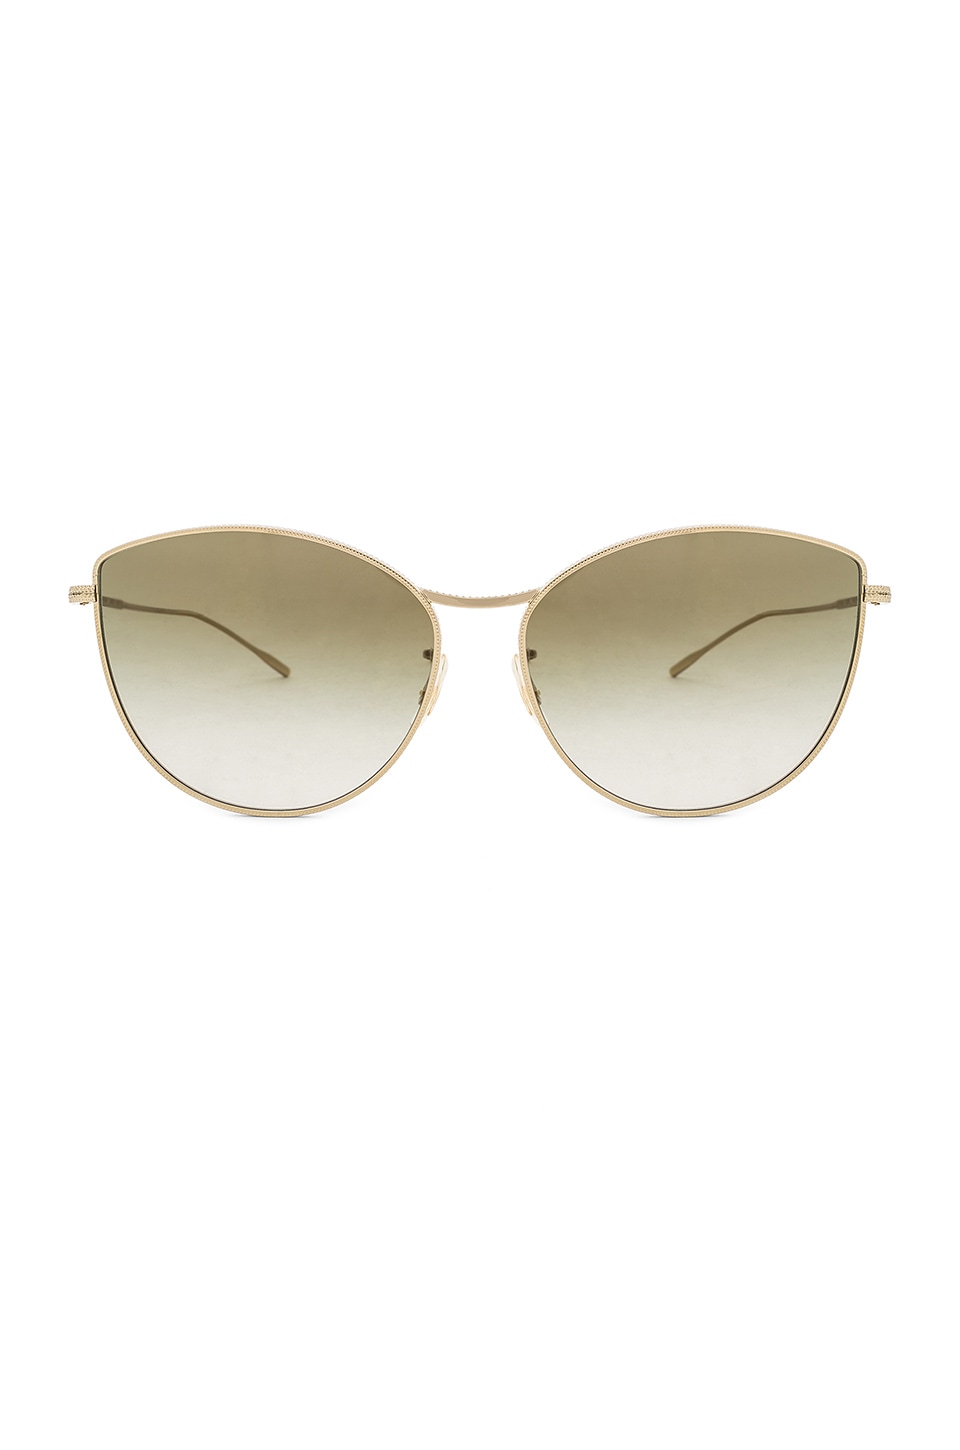 Oliver Peoples Rayette in Soft Gold & Olive Gradient | REVOLVE